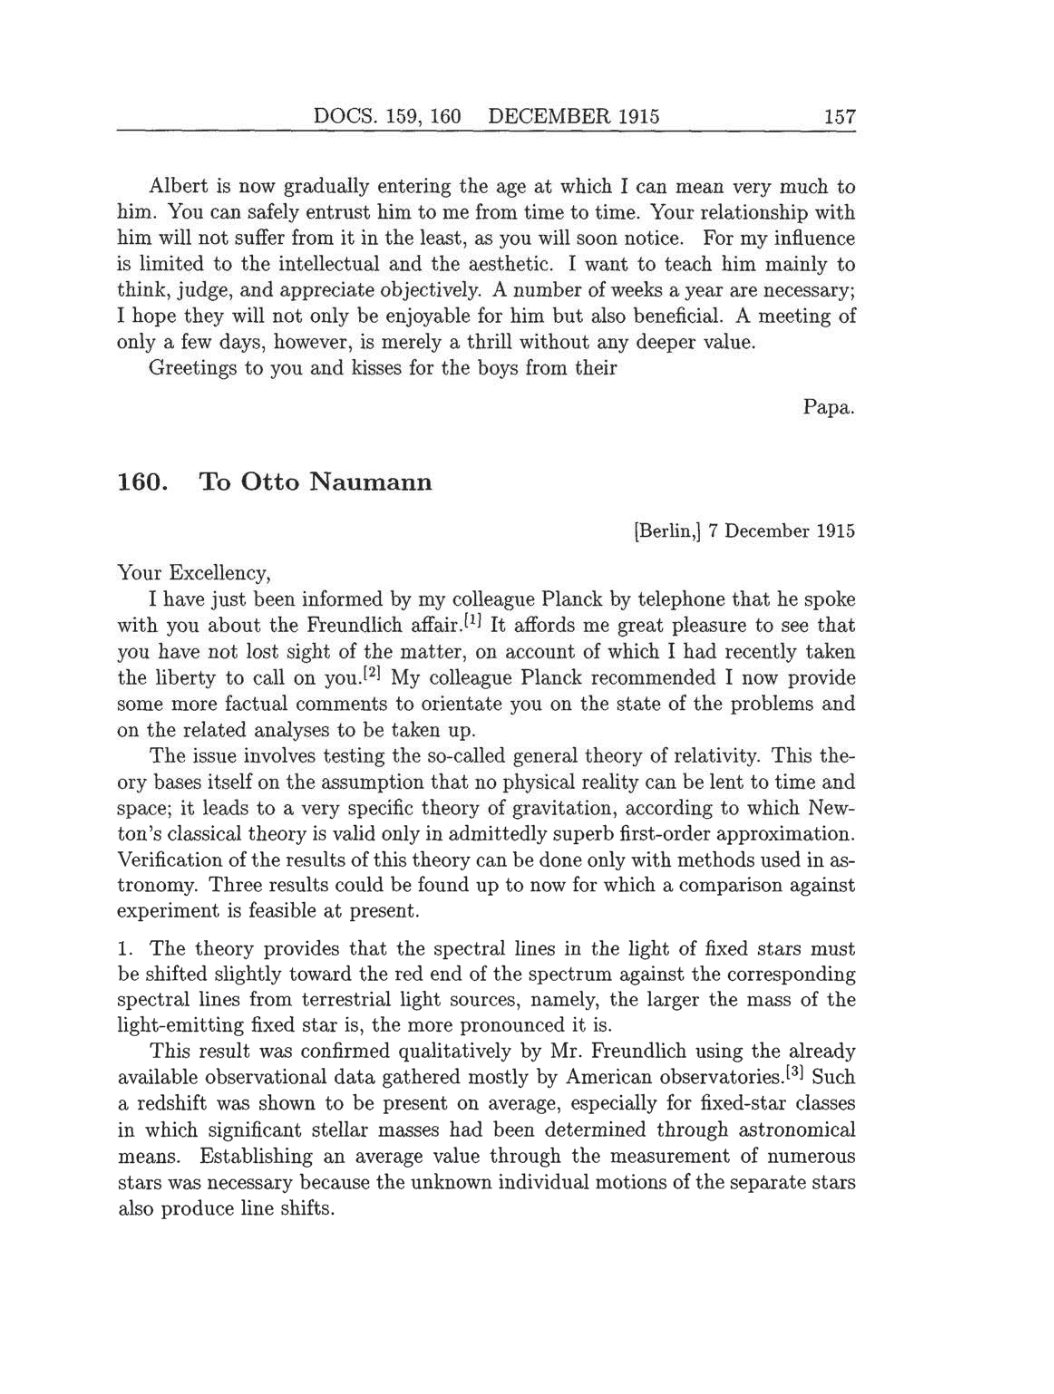 Volume 8: The Berlin Years: Correspondence, 1914-1918 (English translation supplement) page 157